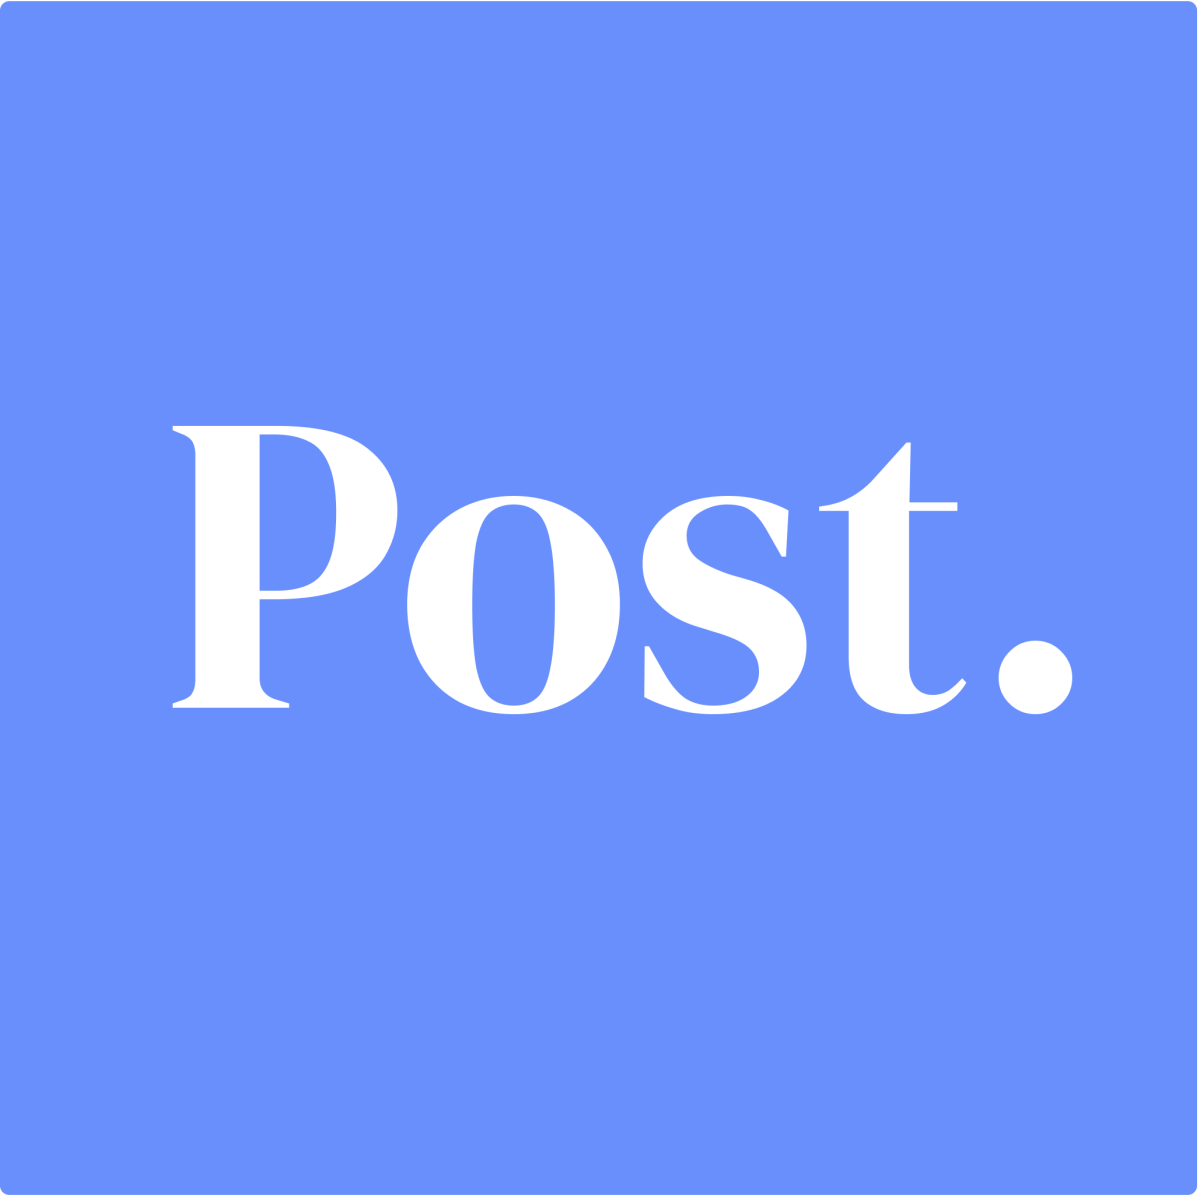 Post, a new social media app, seeks to shake up the news landscape